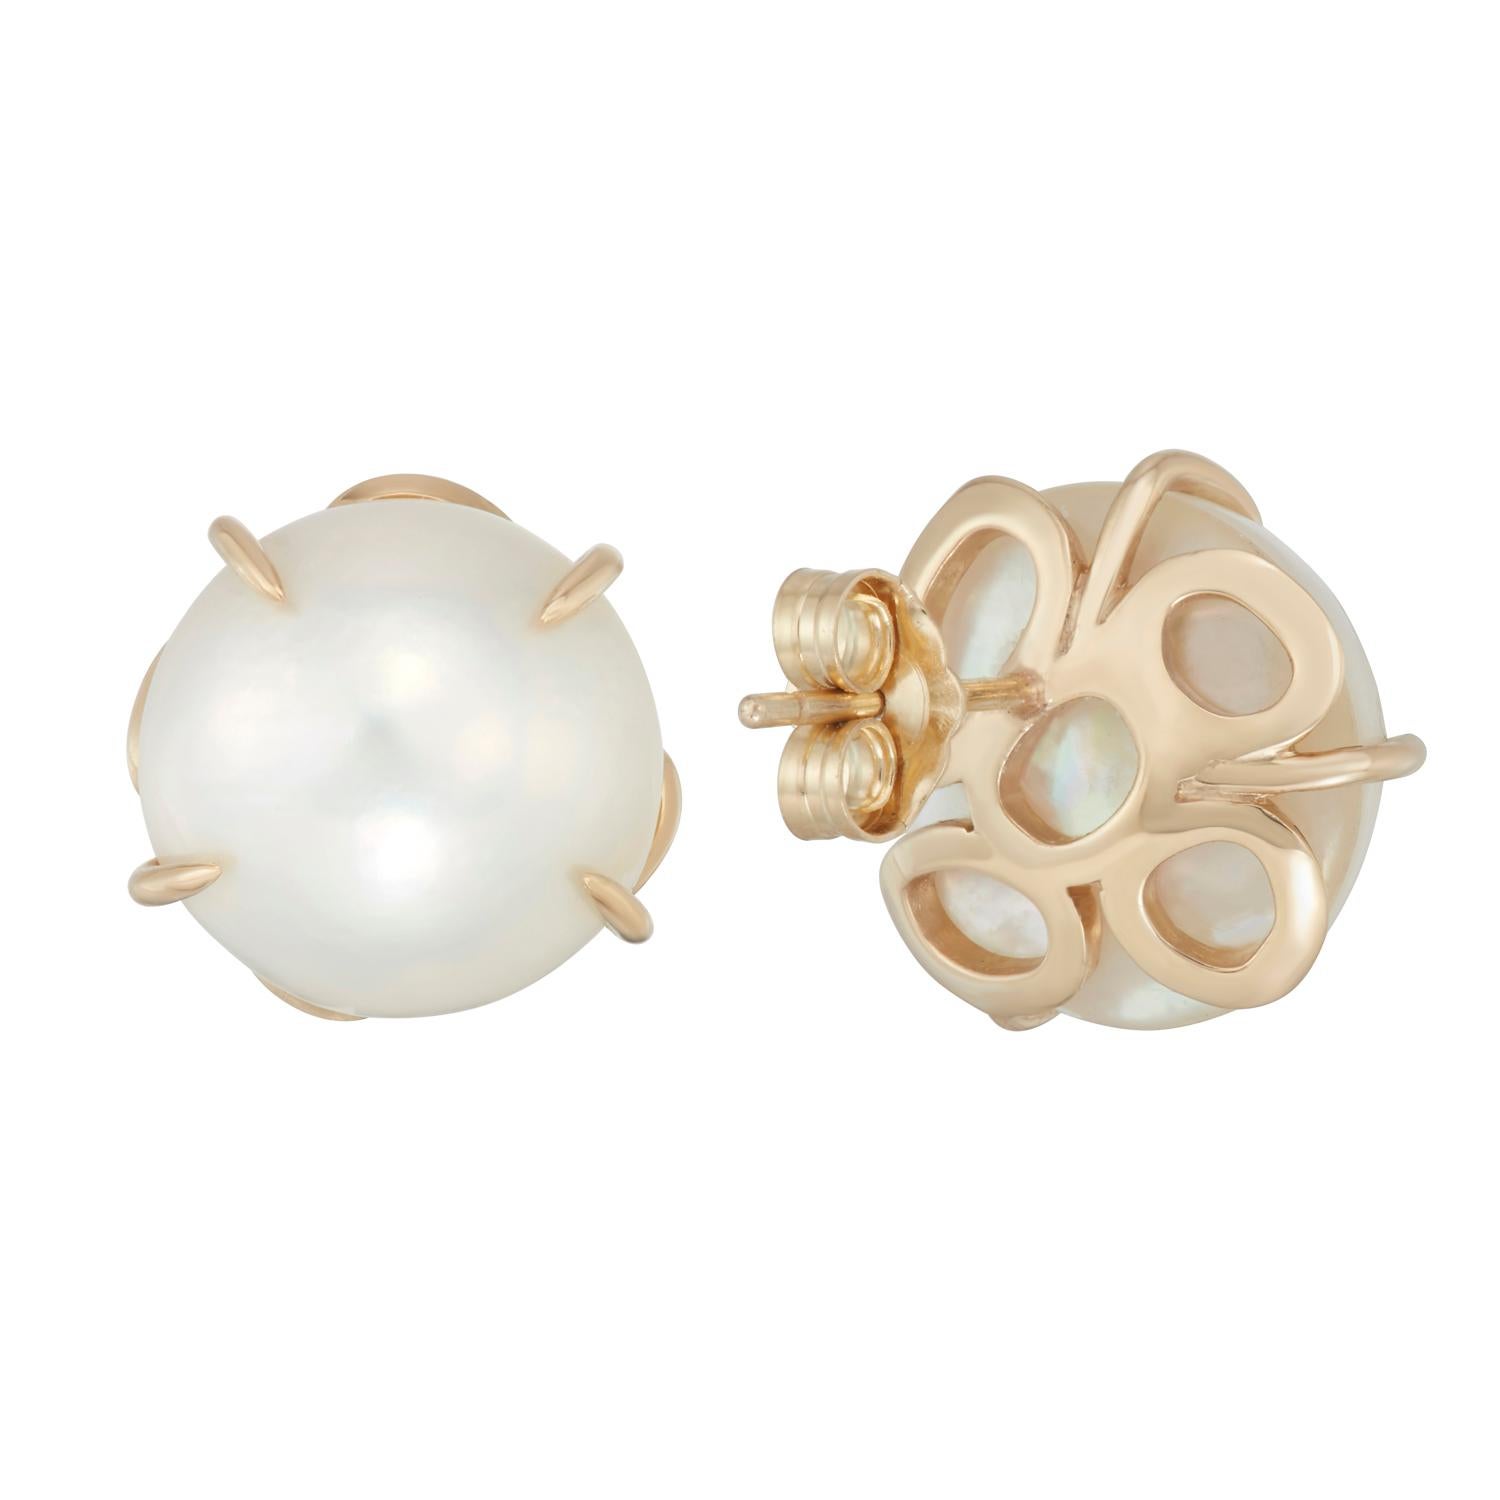 Not just your ordinary pearl earrings, these bold round lustrous Mabe (pronounced May-Bay) pearls are prong set with Hi June Parker's signature organic circular elements on the back.
Wear them with your hair up or down, for any occasion to celebrate